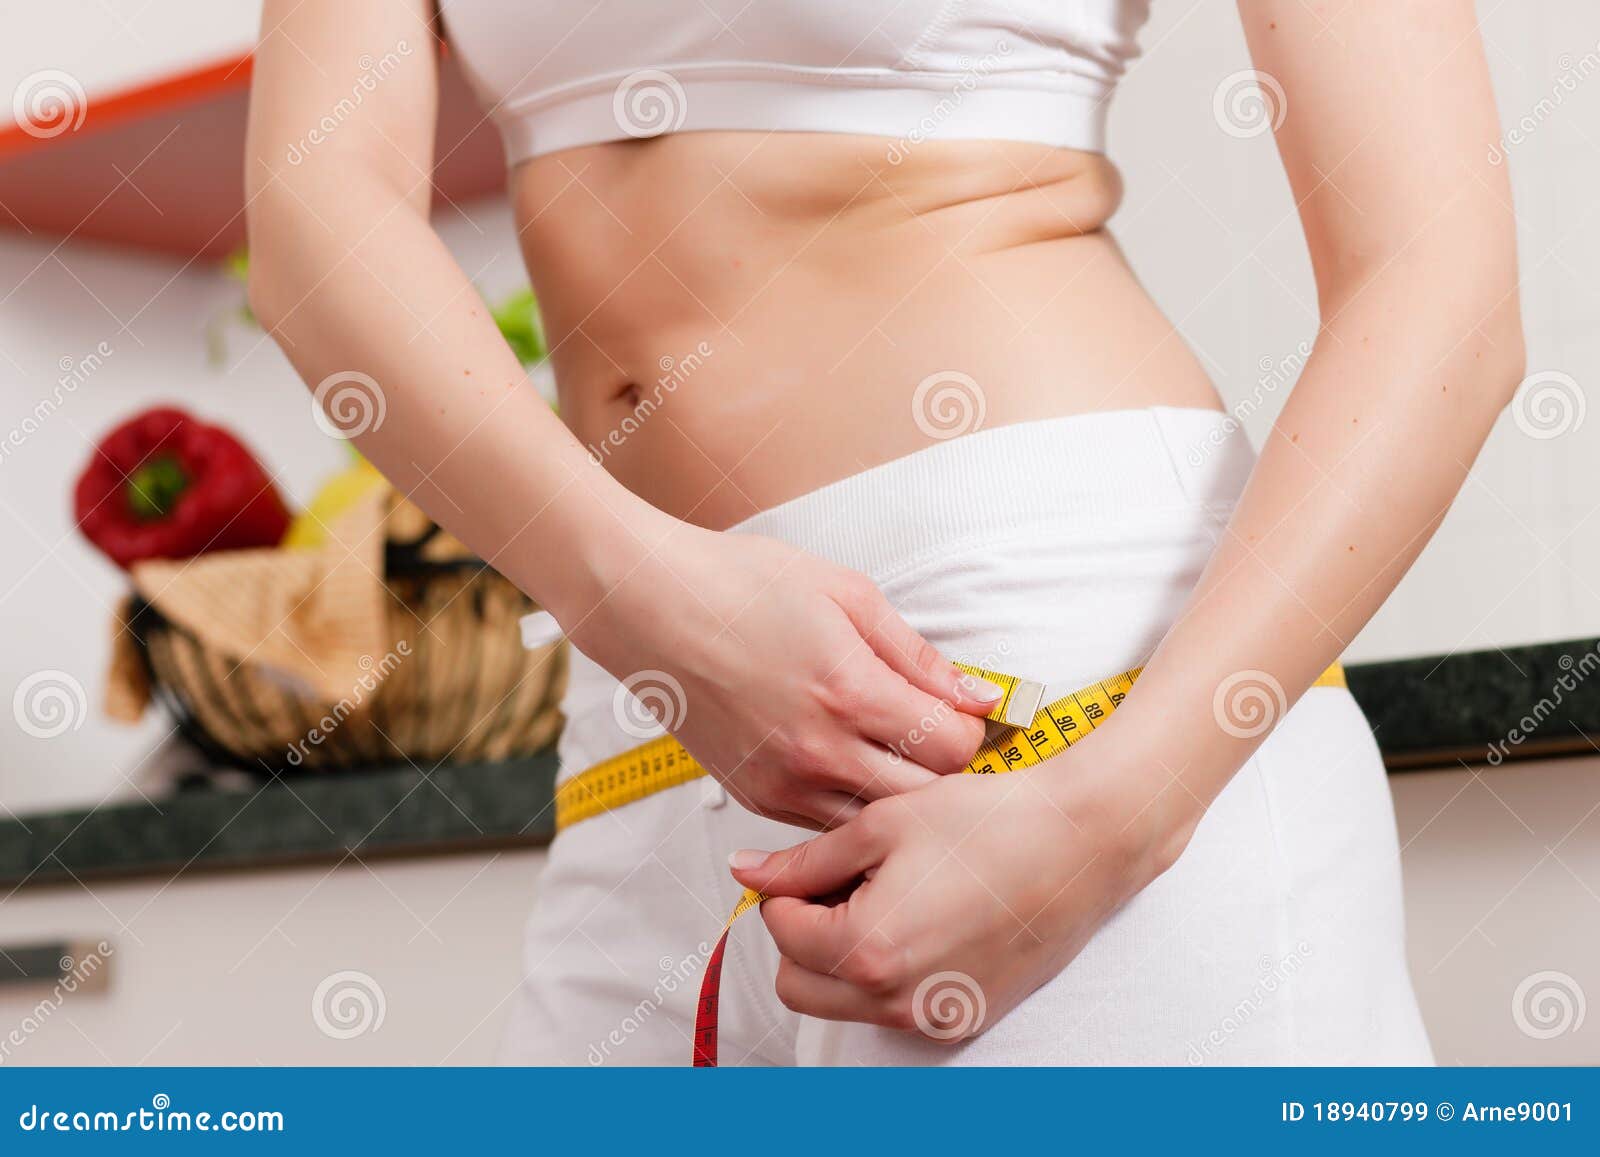 4,100+ Measuring Hips Stock Photos, Pictures & Royalty-Free Images